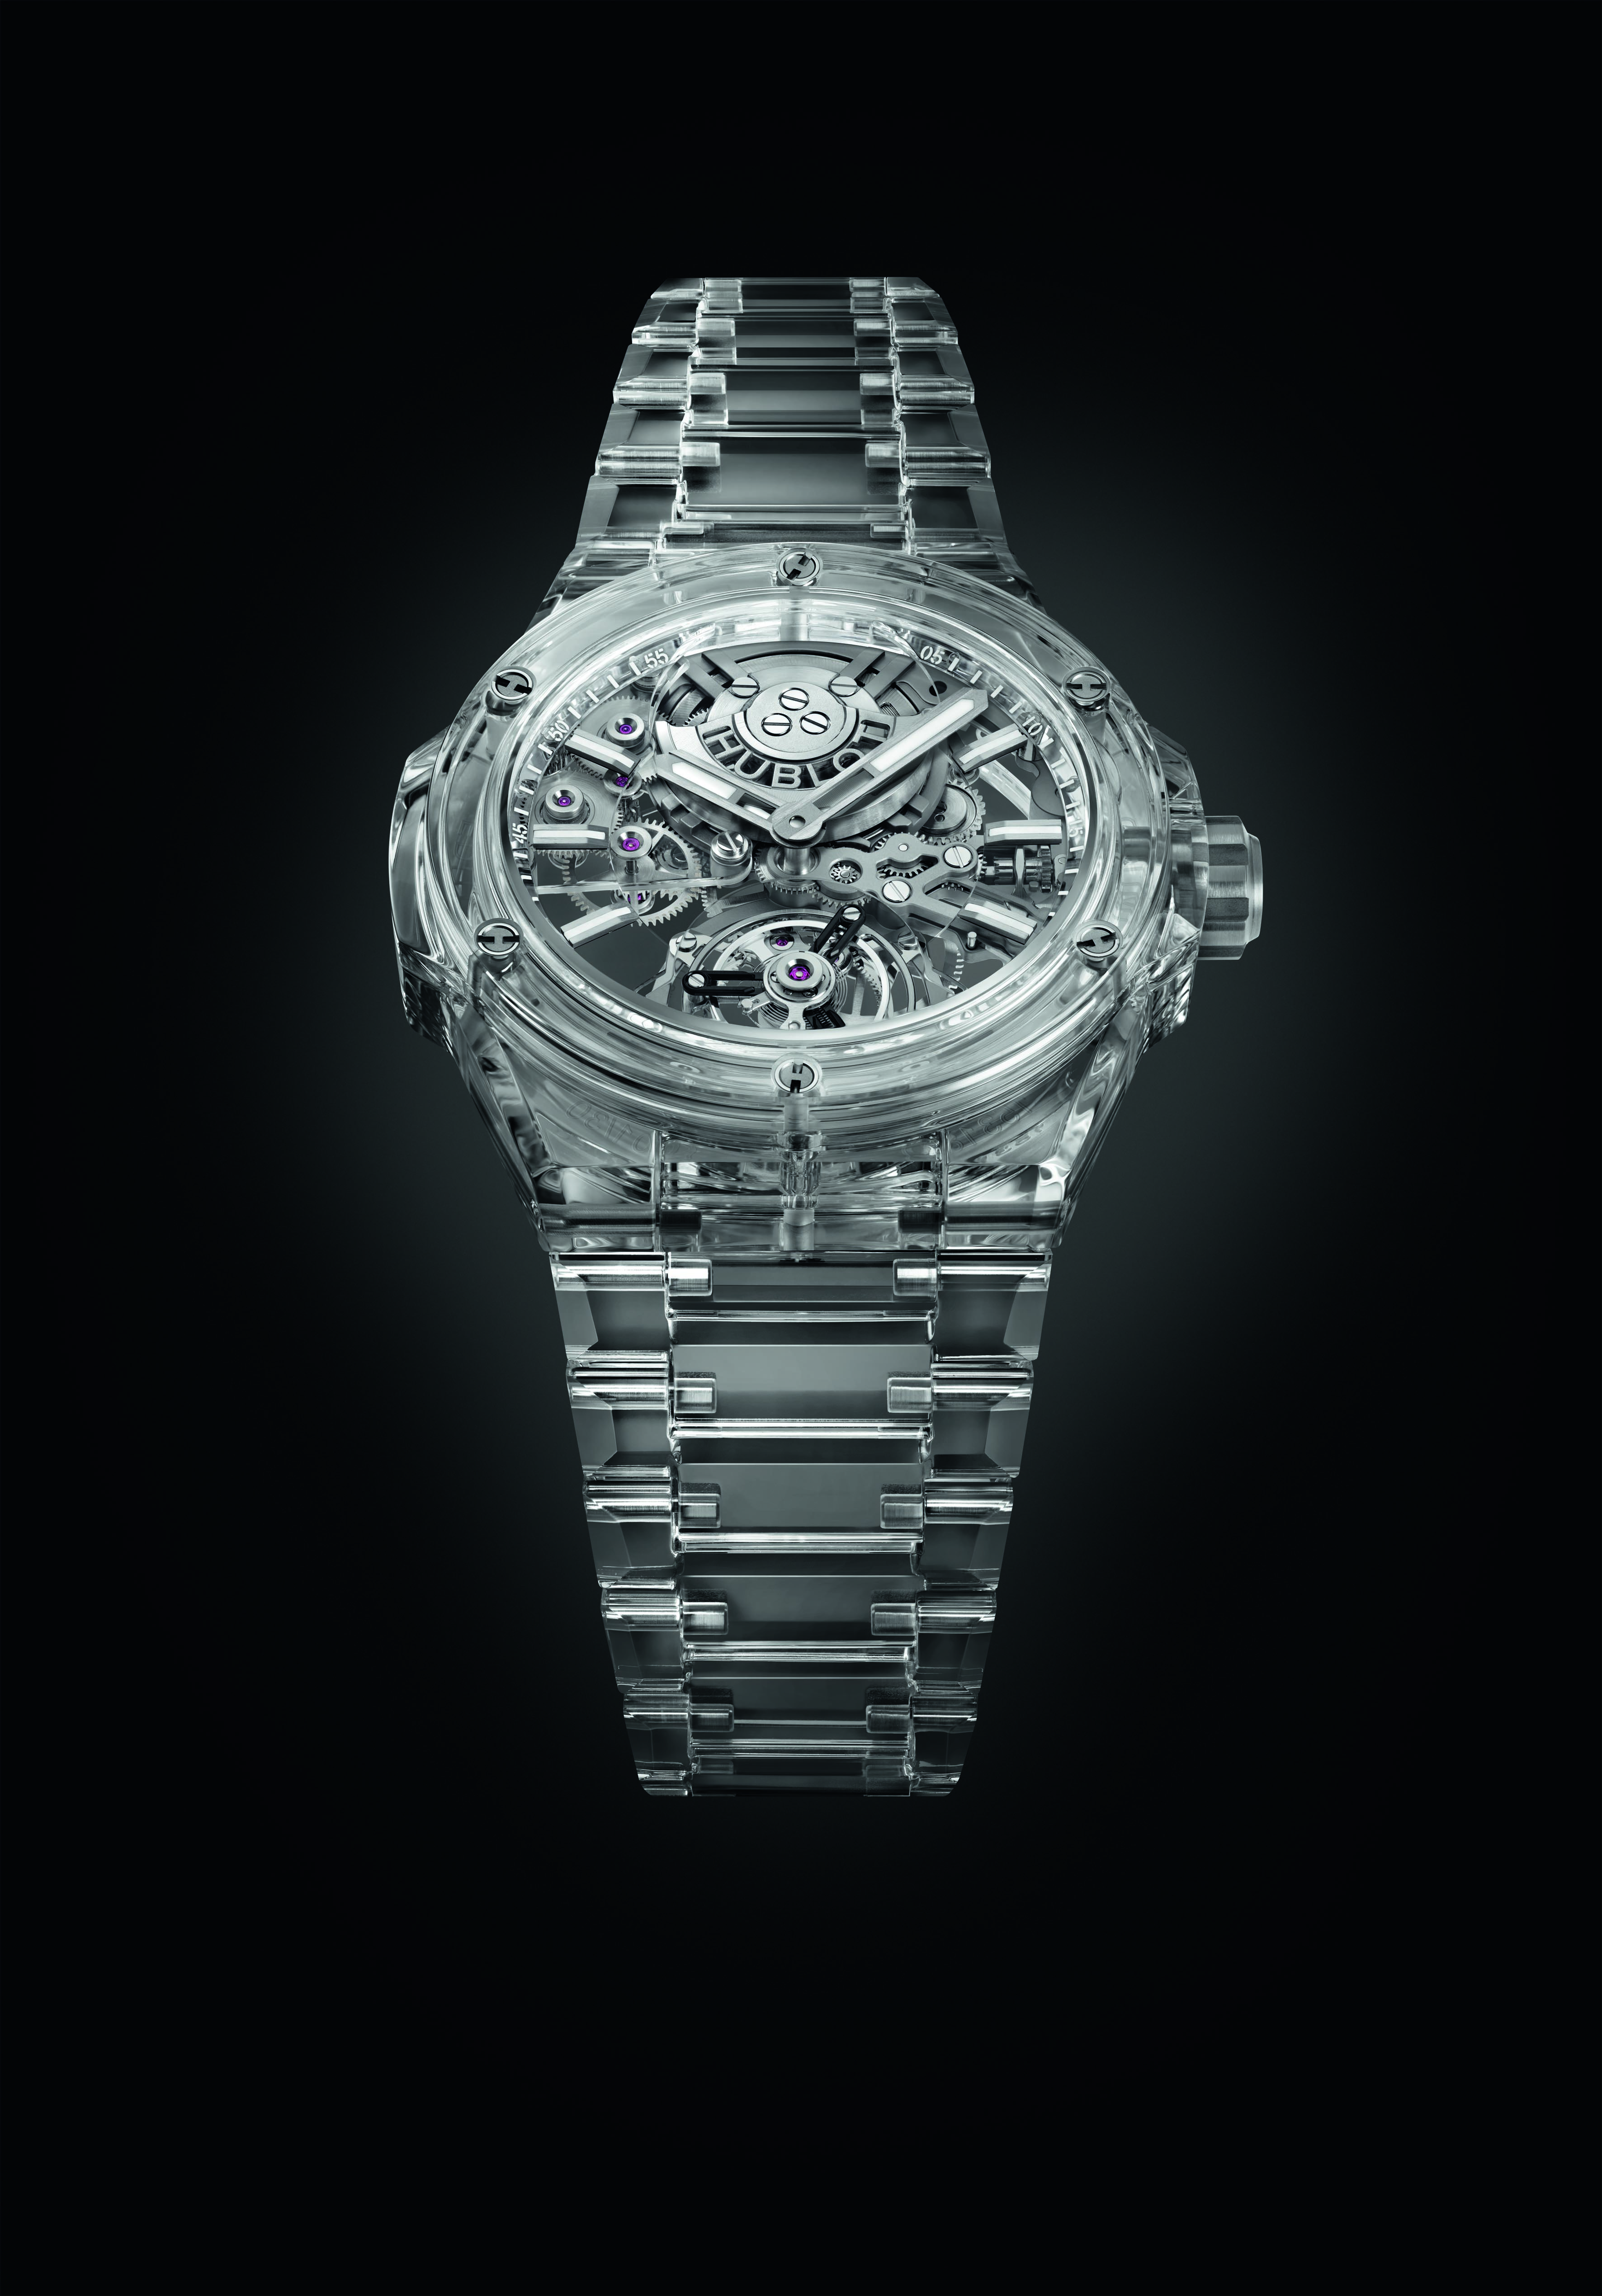 Hublot: luminous innovations for Watches and Wonders - LVMH